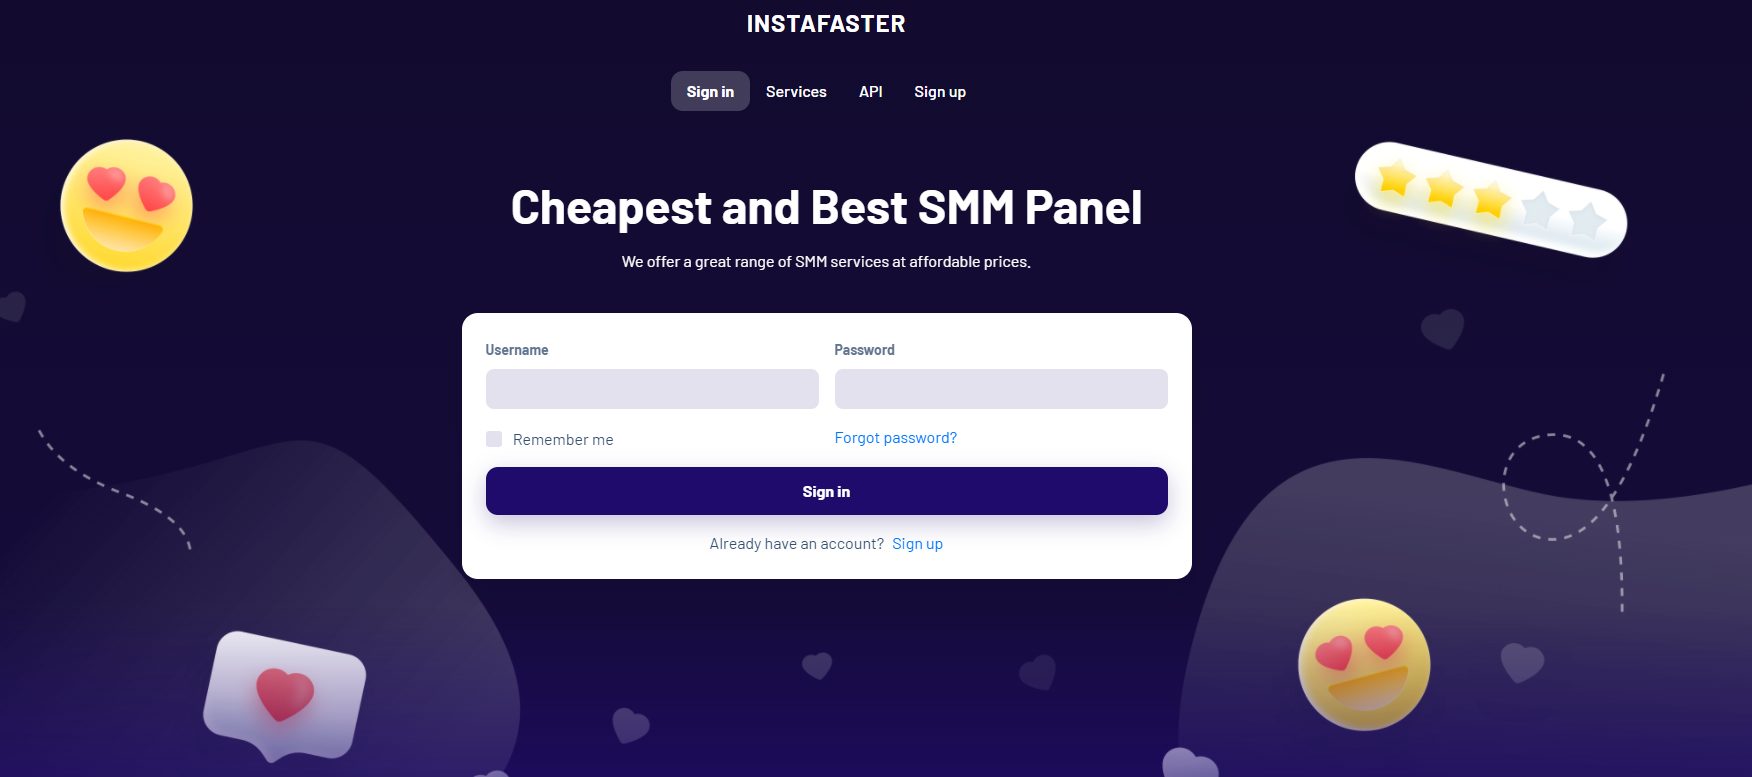 10 Best SMM Panel for Social Media Services in 2021